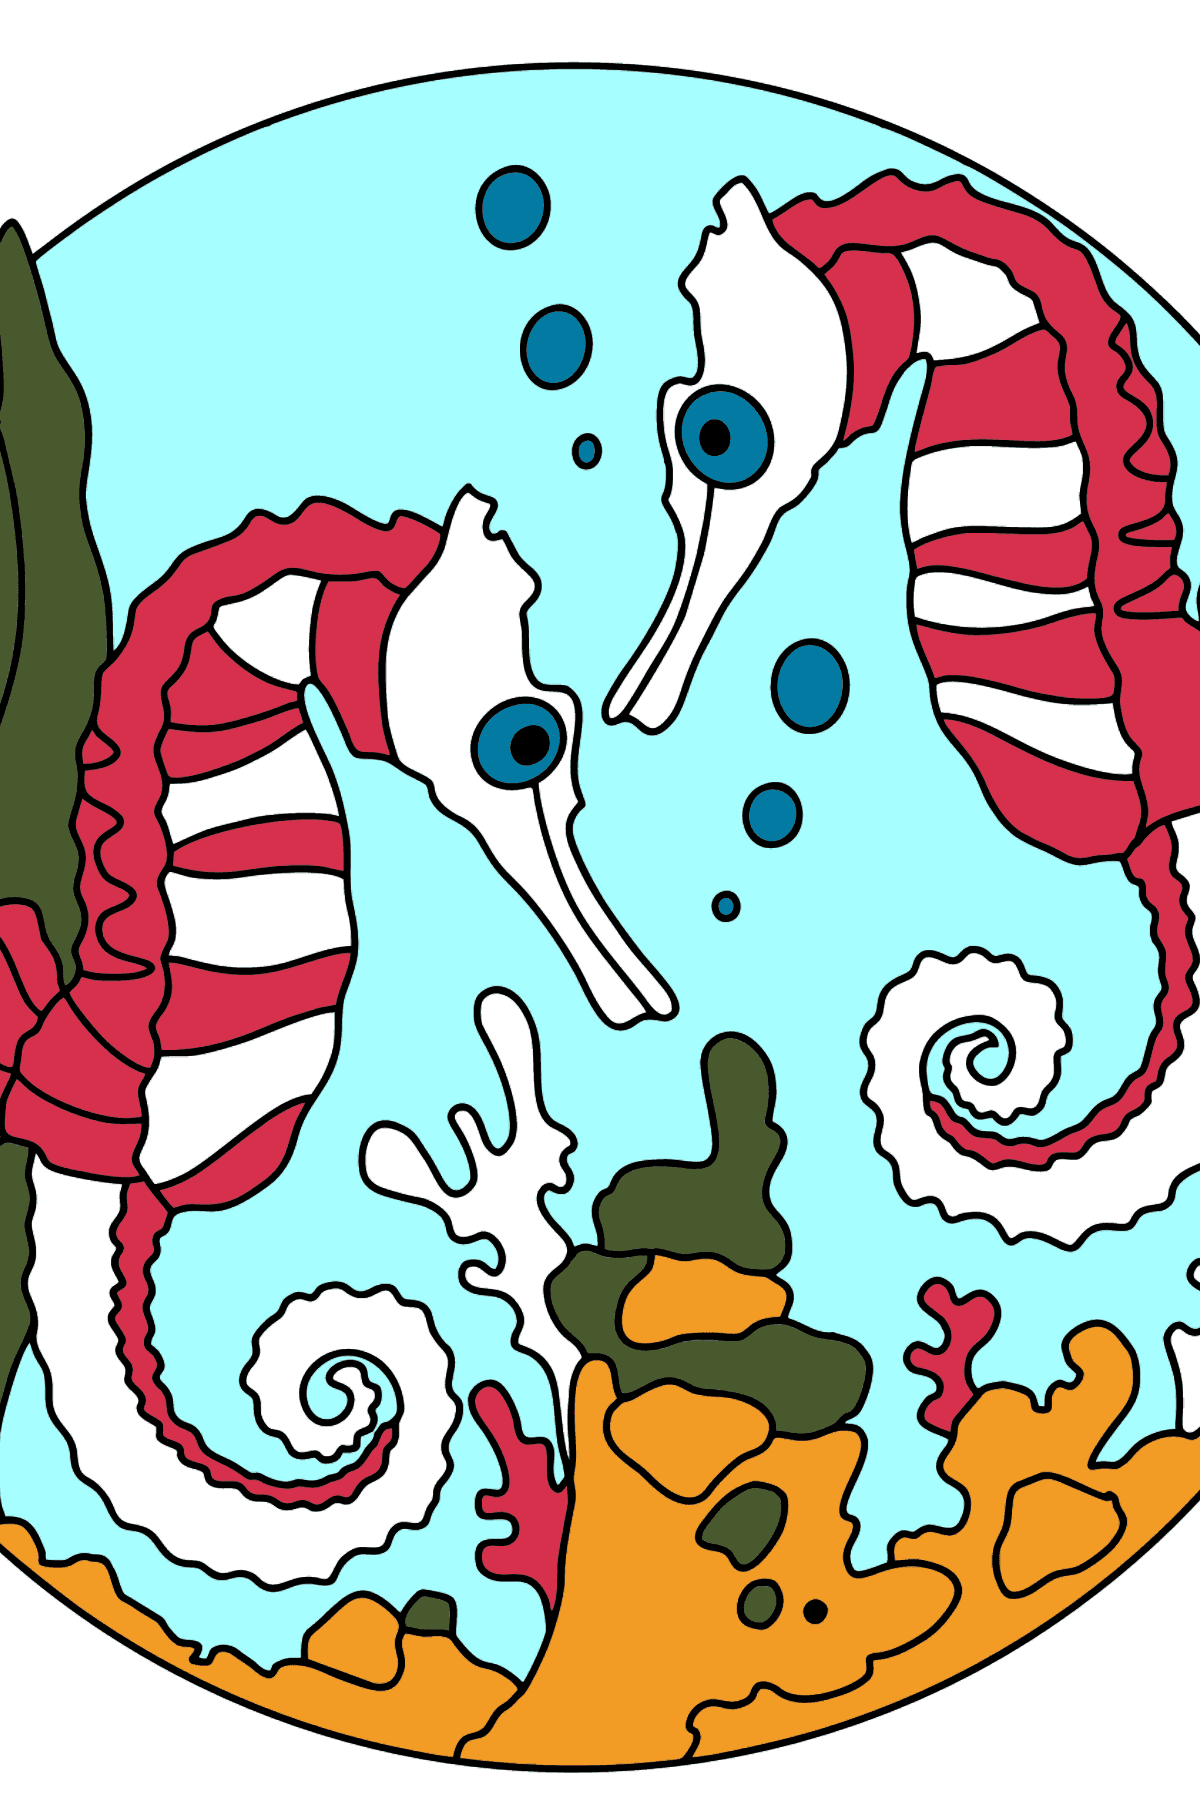 Seahorses Coloring Page (Easy) - Coloring Pages for Kids